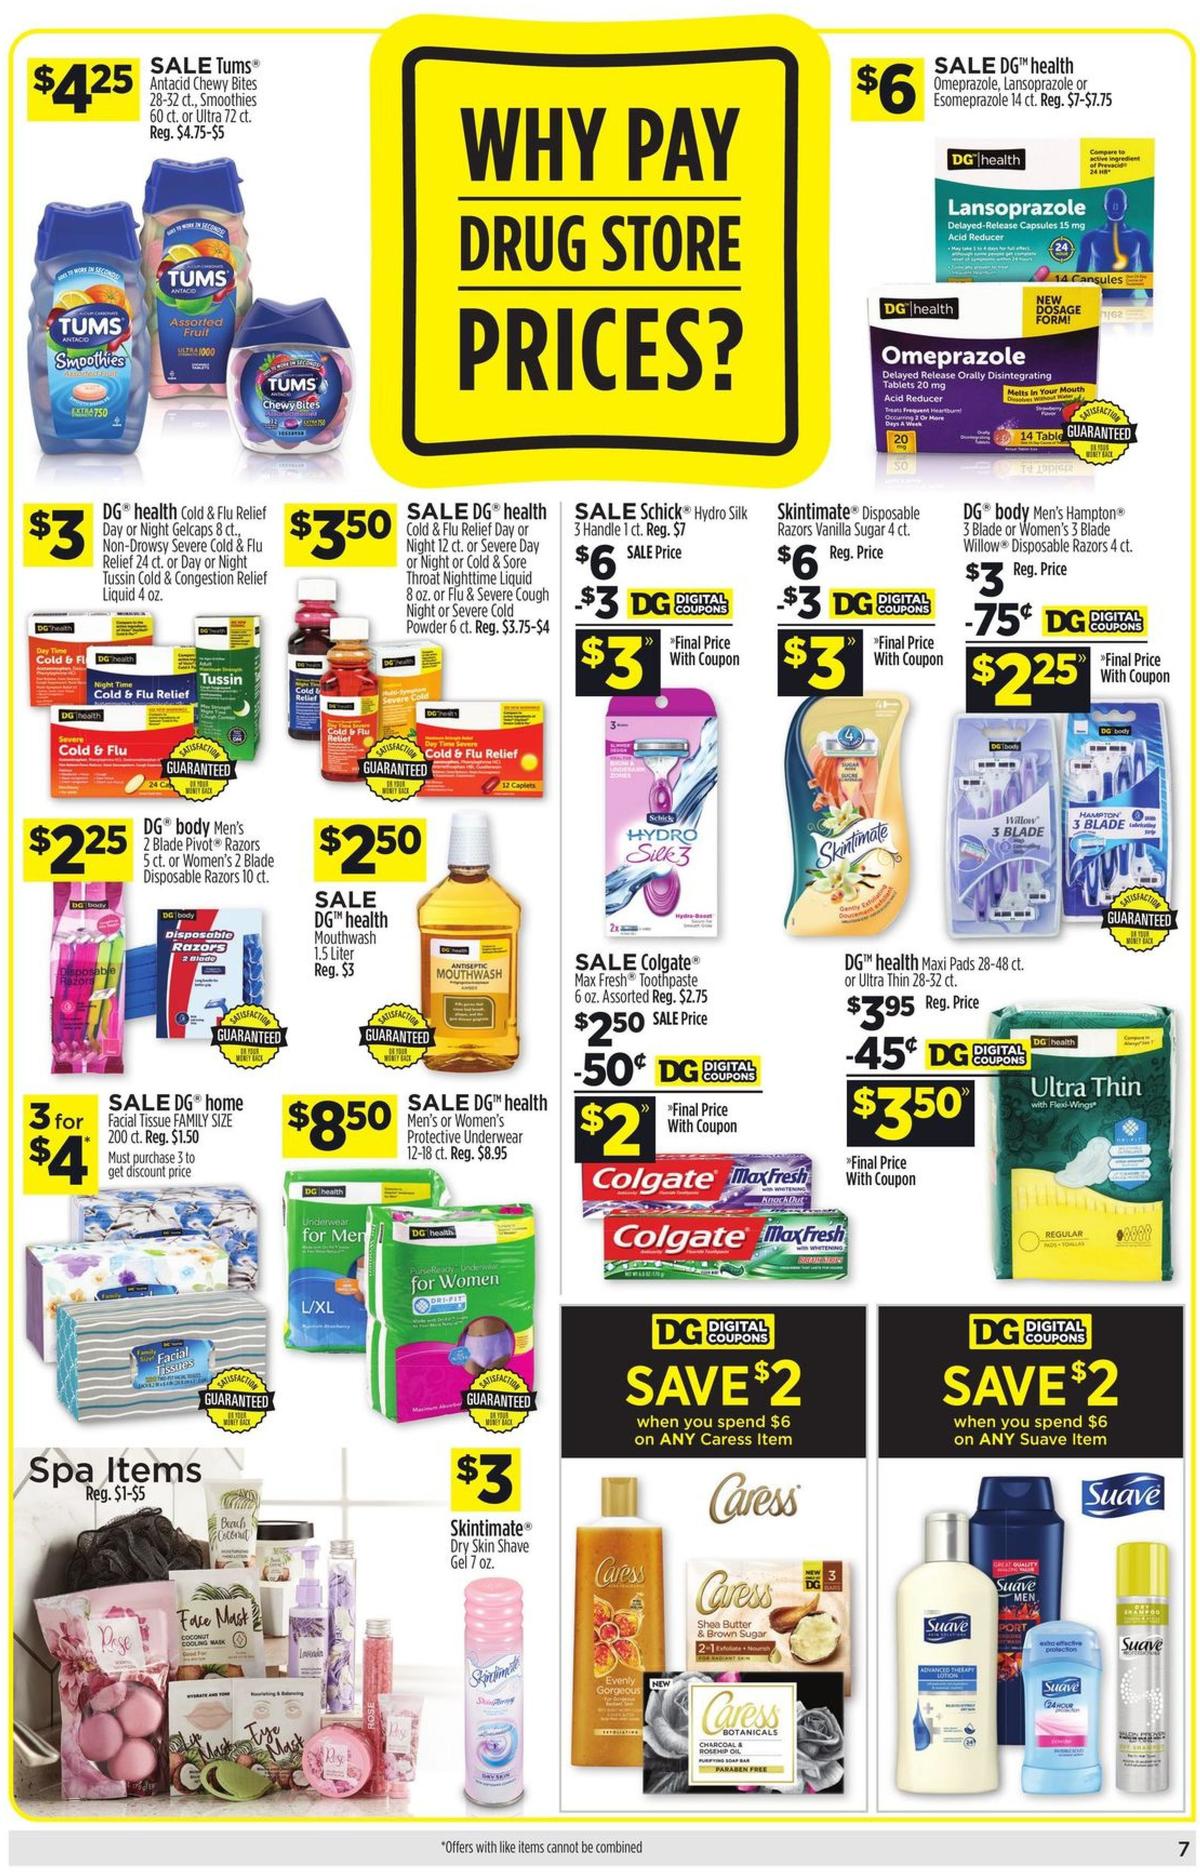 Dollar General Weekly Ad from January 26